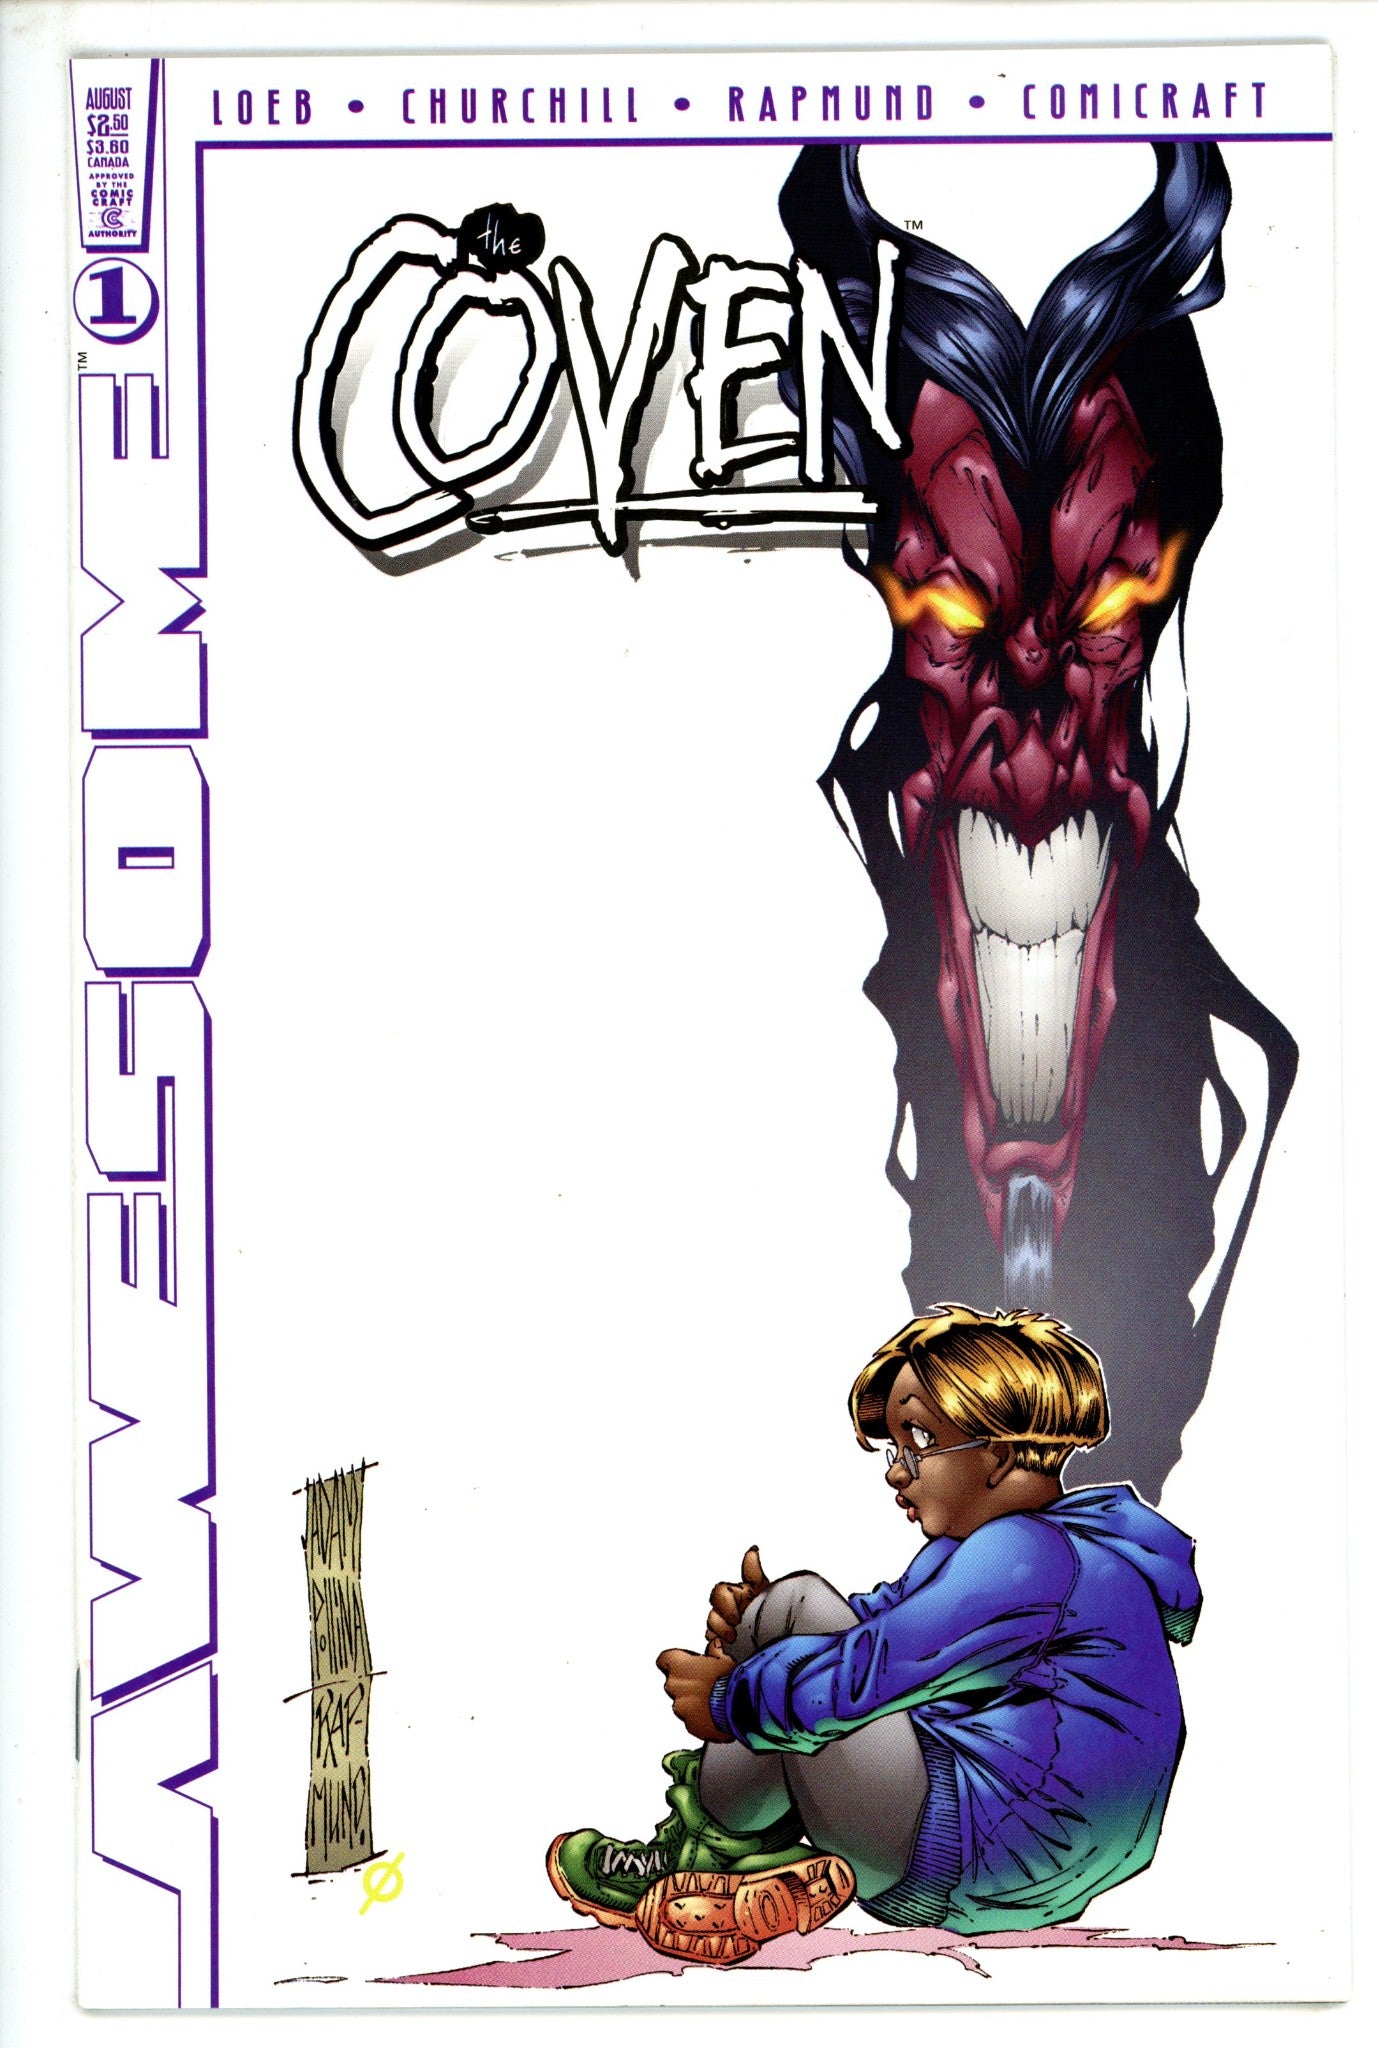 The Coven Vol 1 1 Pollina Variant (1997)